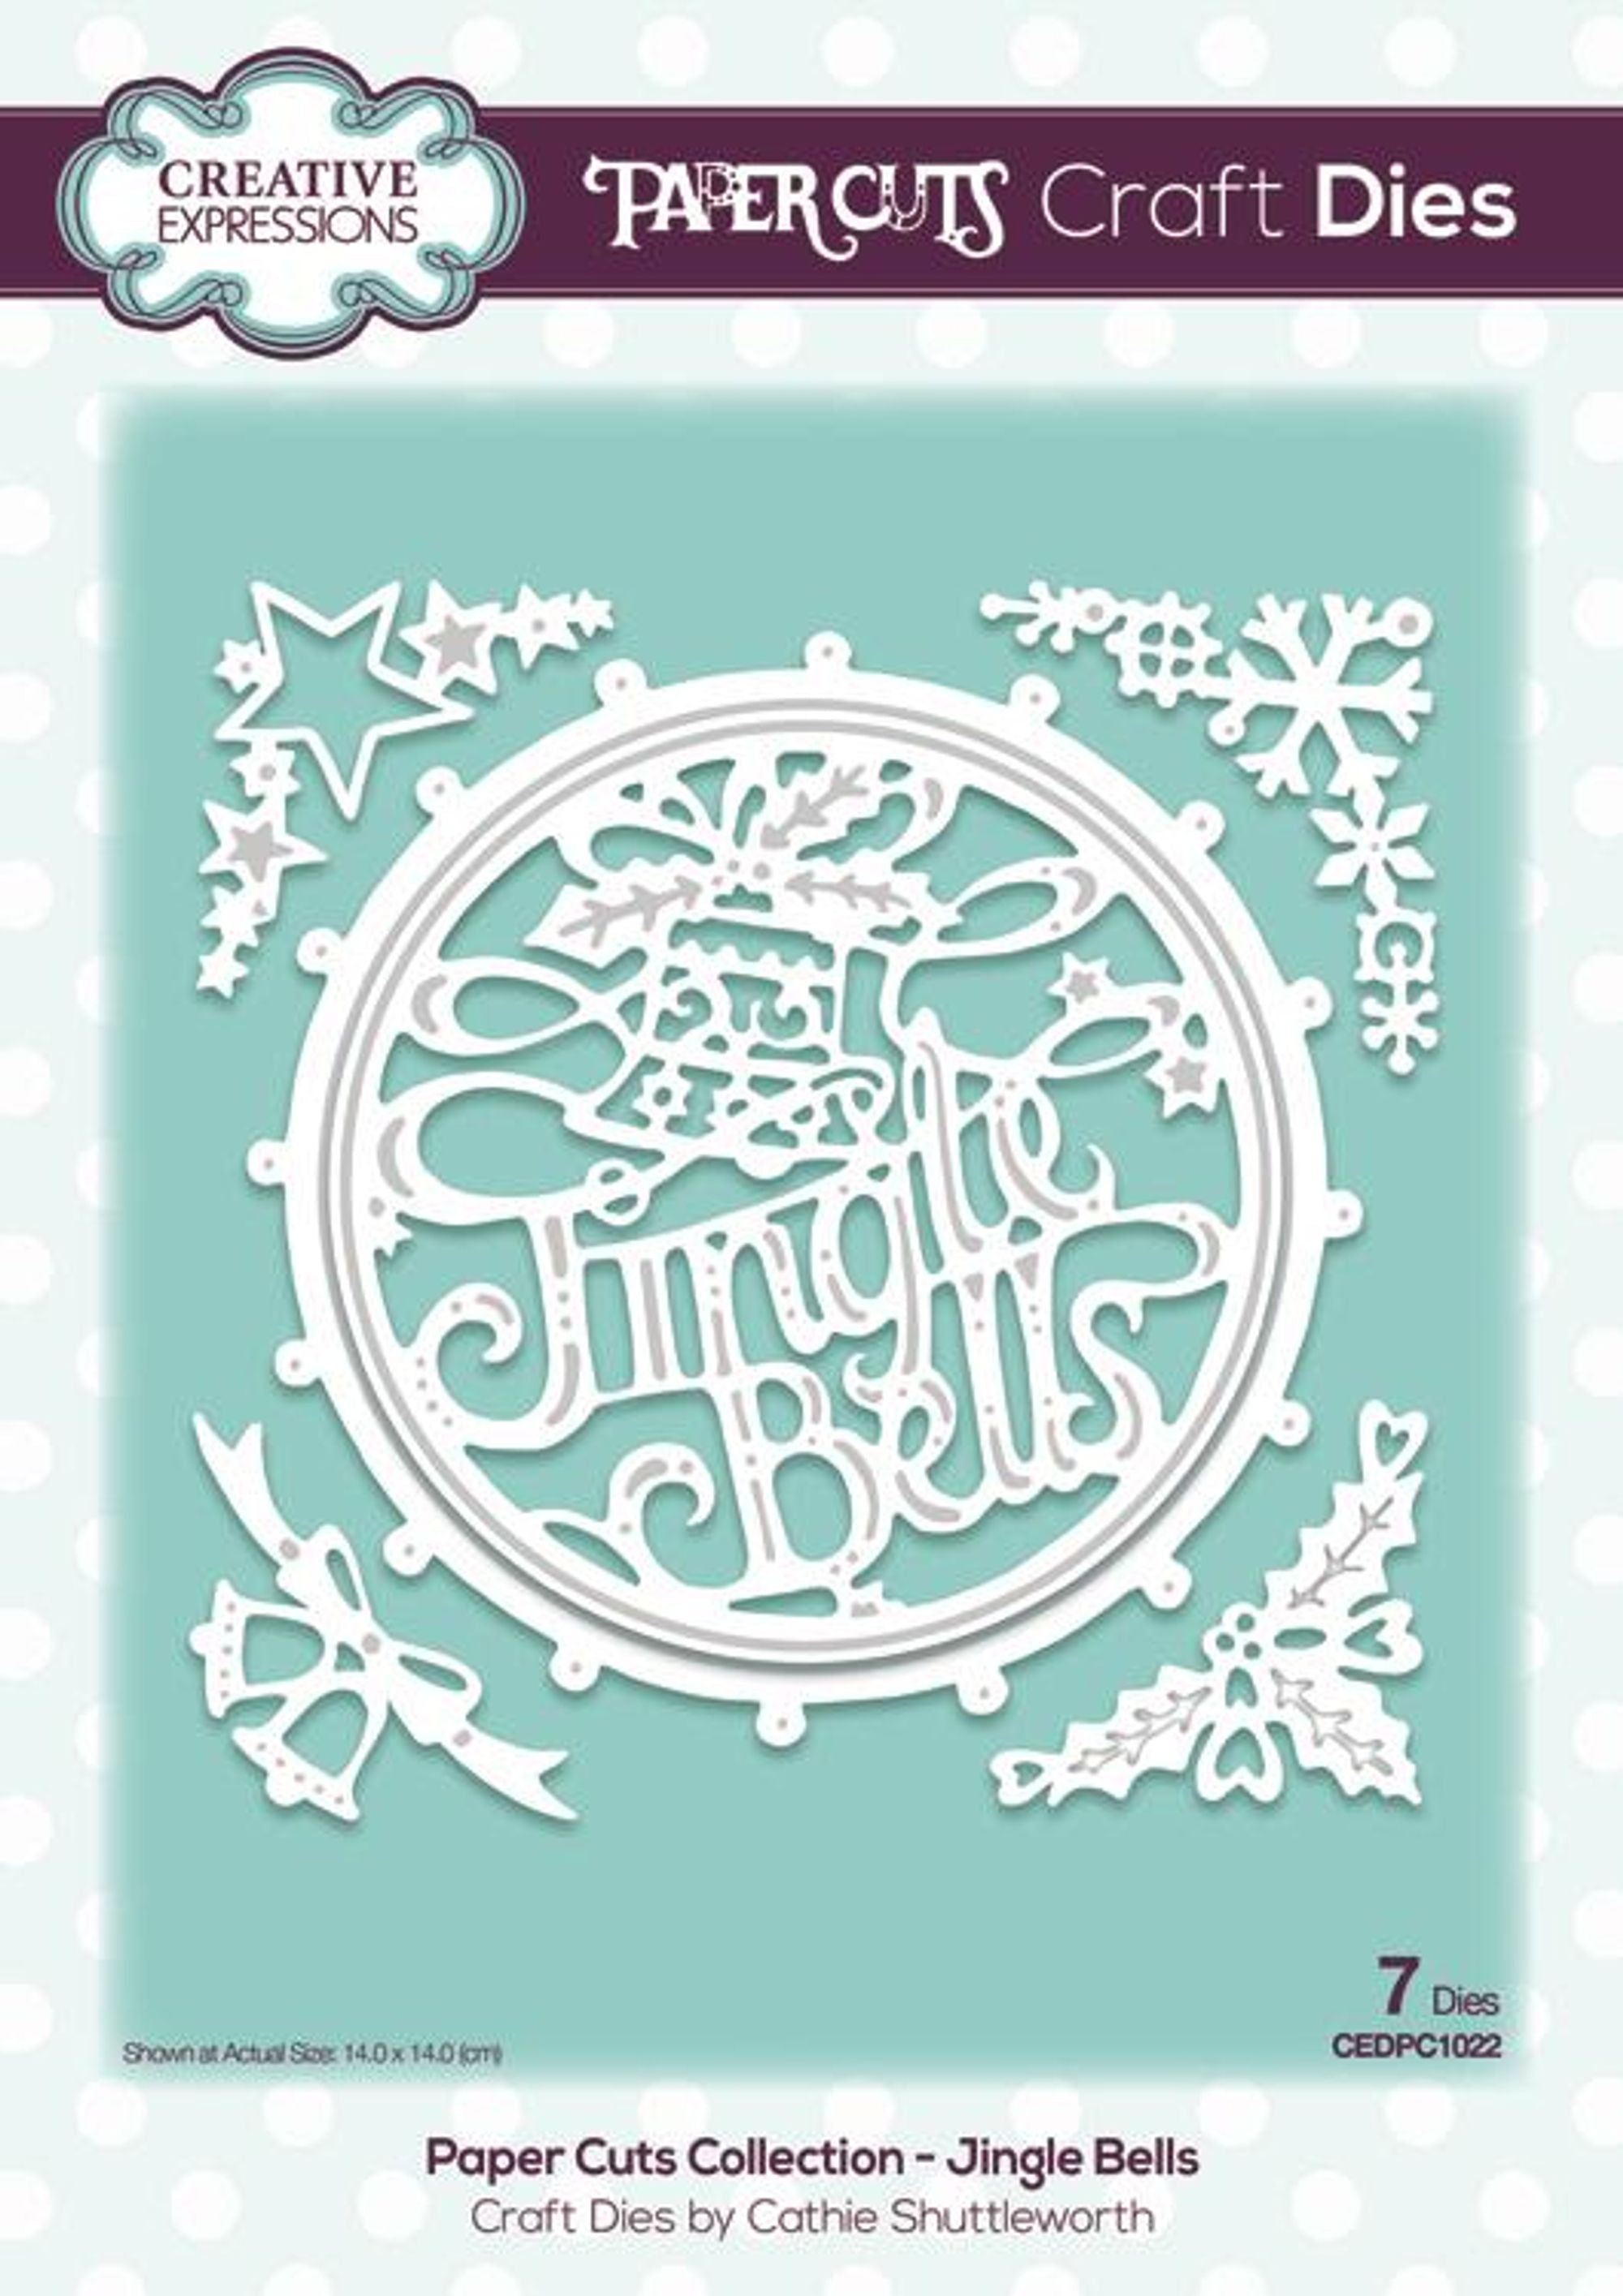 Creative Expressions Die Paper Cuts Collection - Jingle Bells